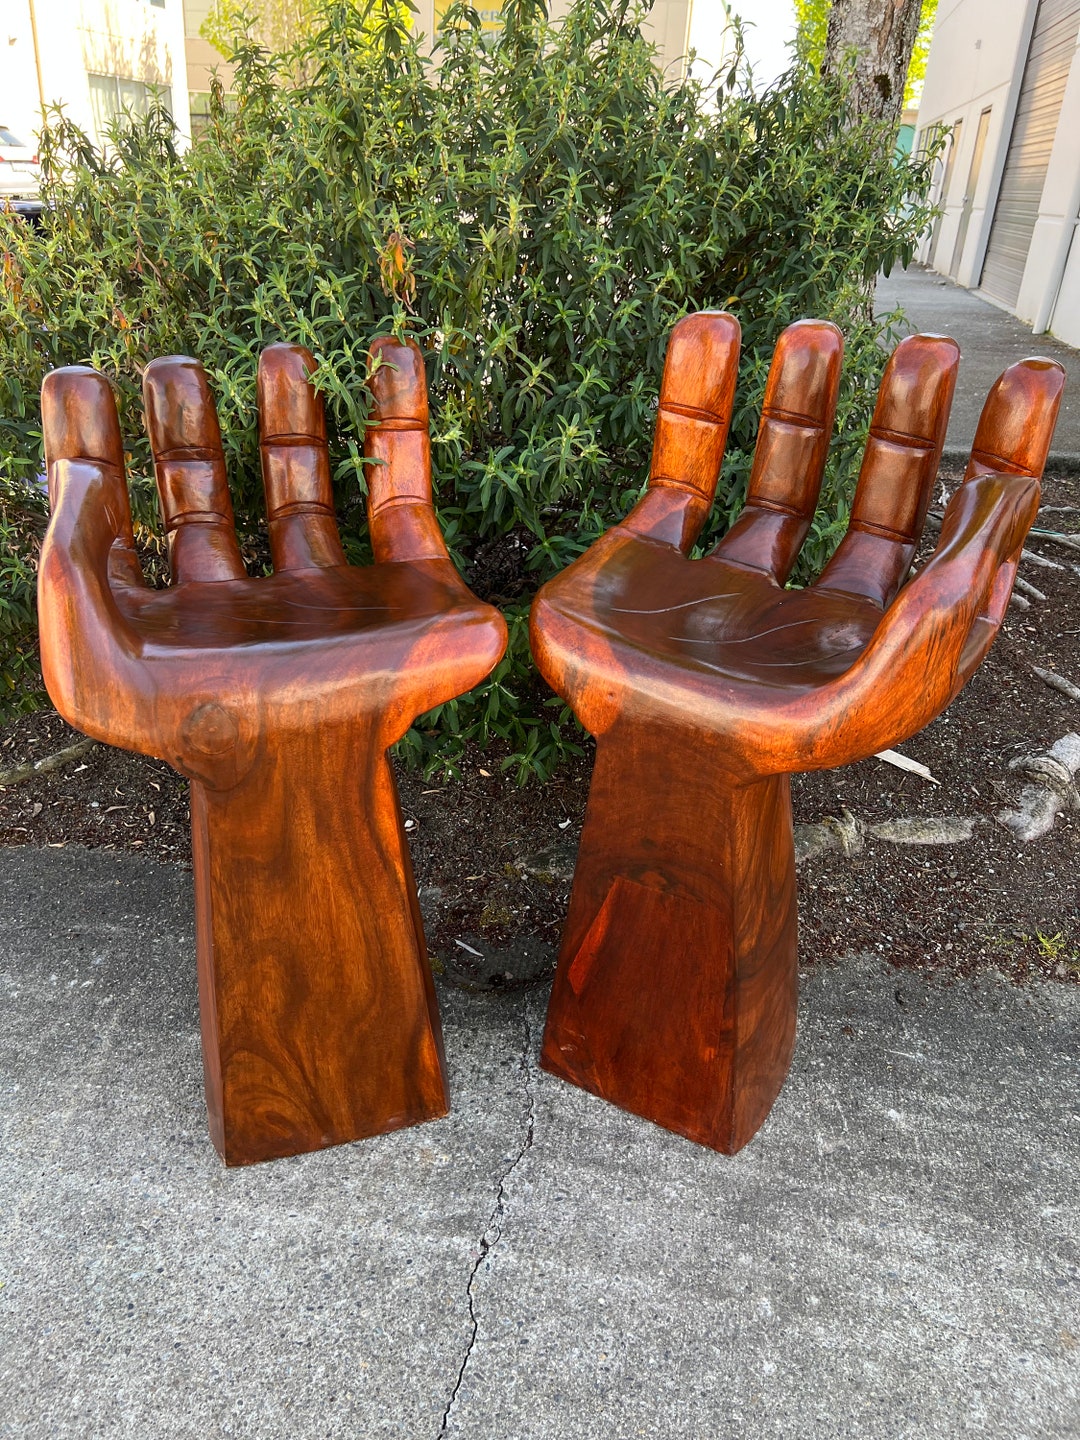 Wood Hand Chair Furniture from Bali Indonesia